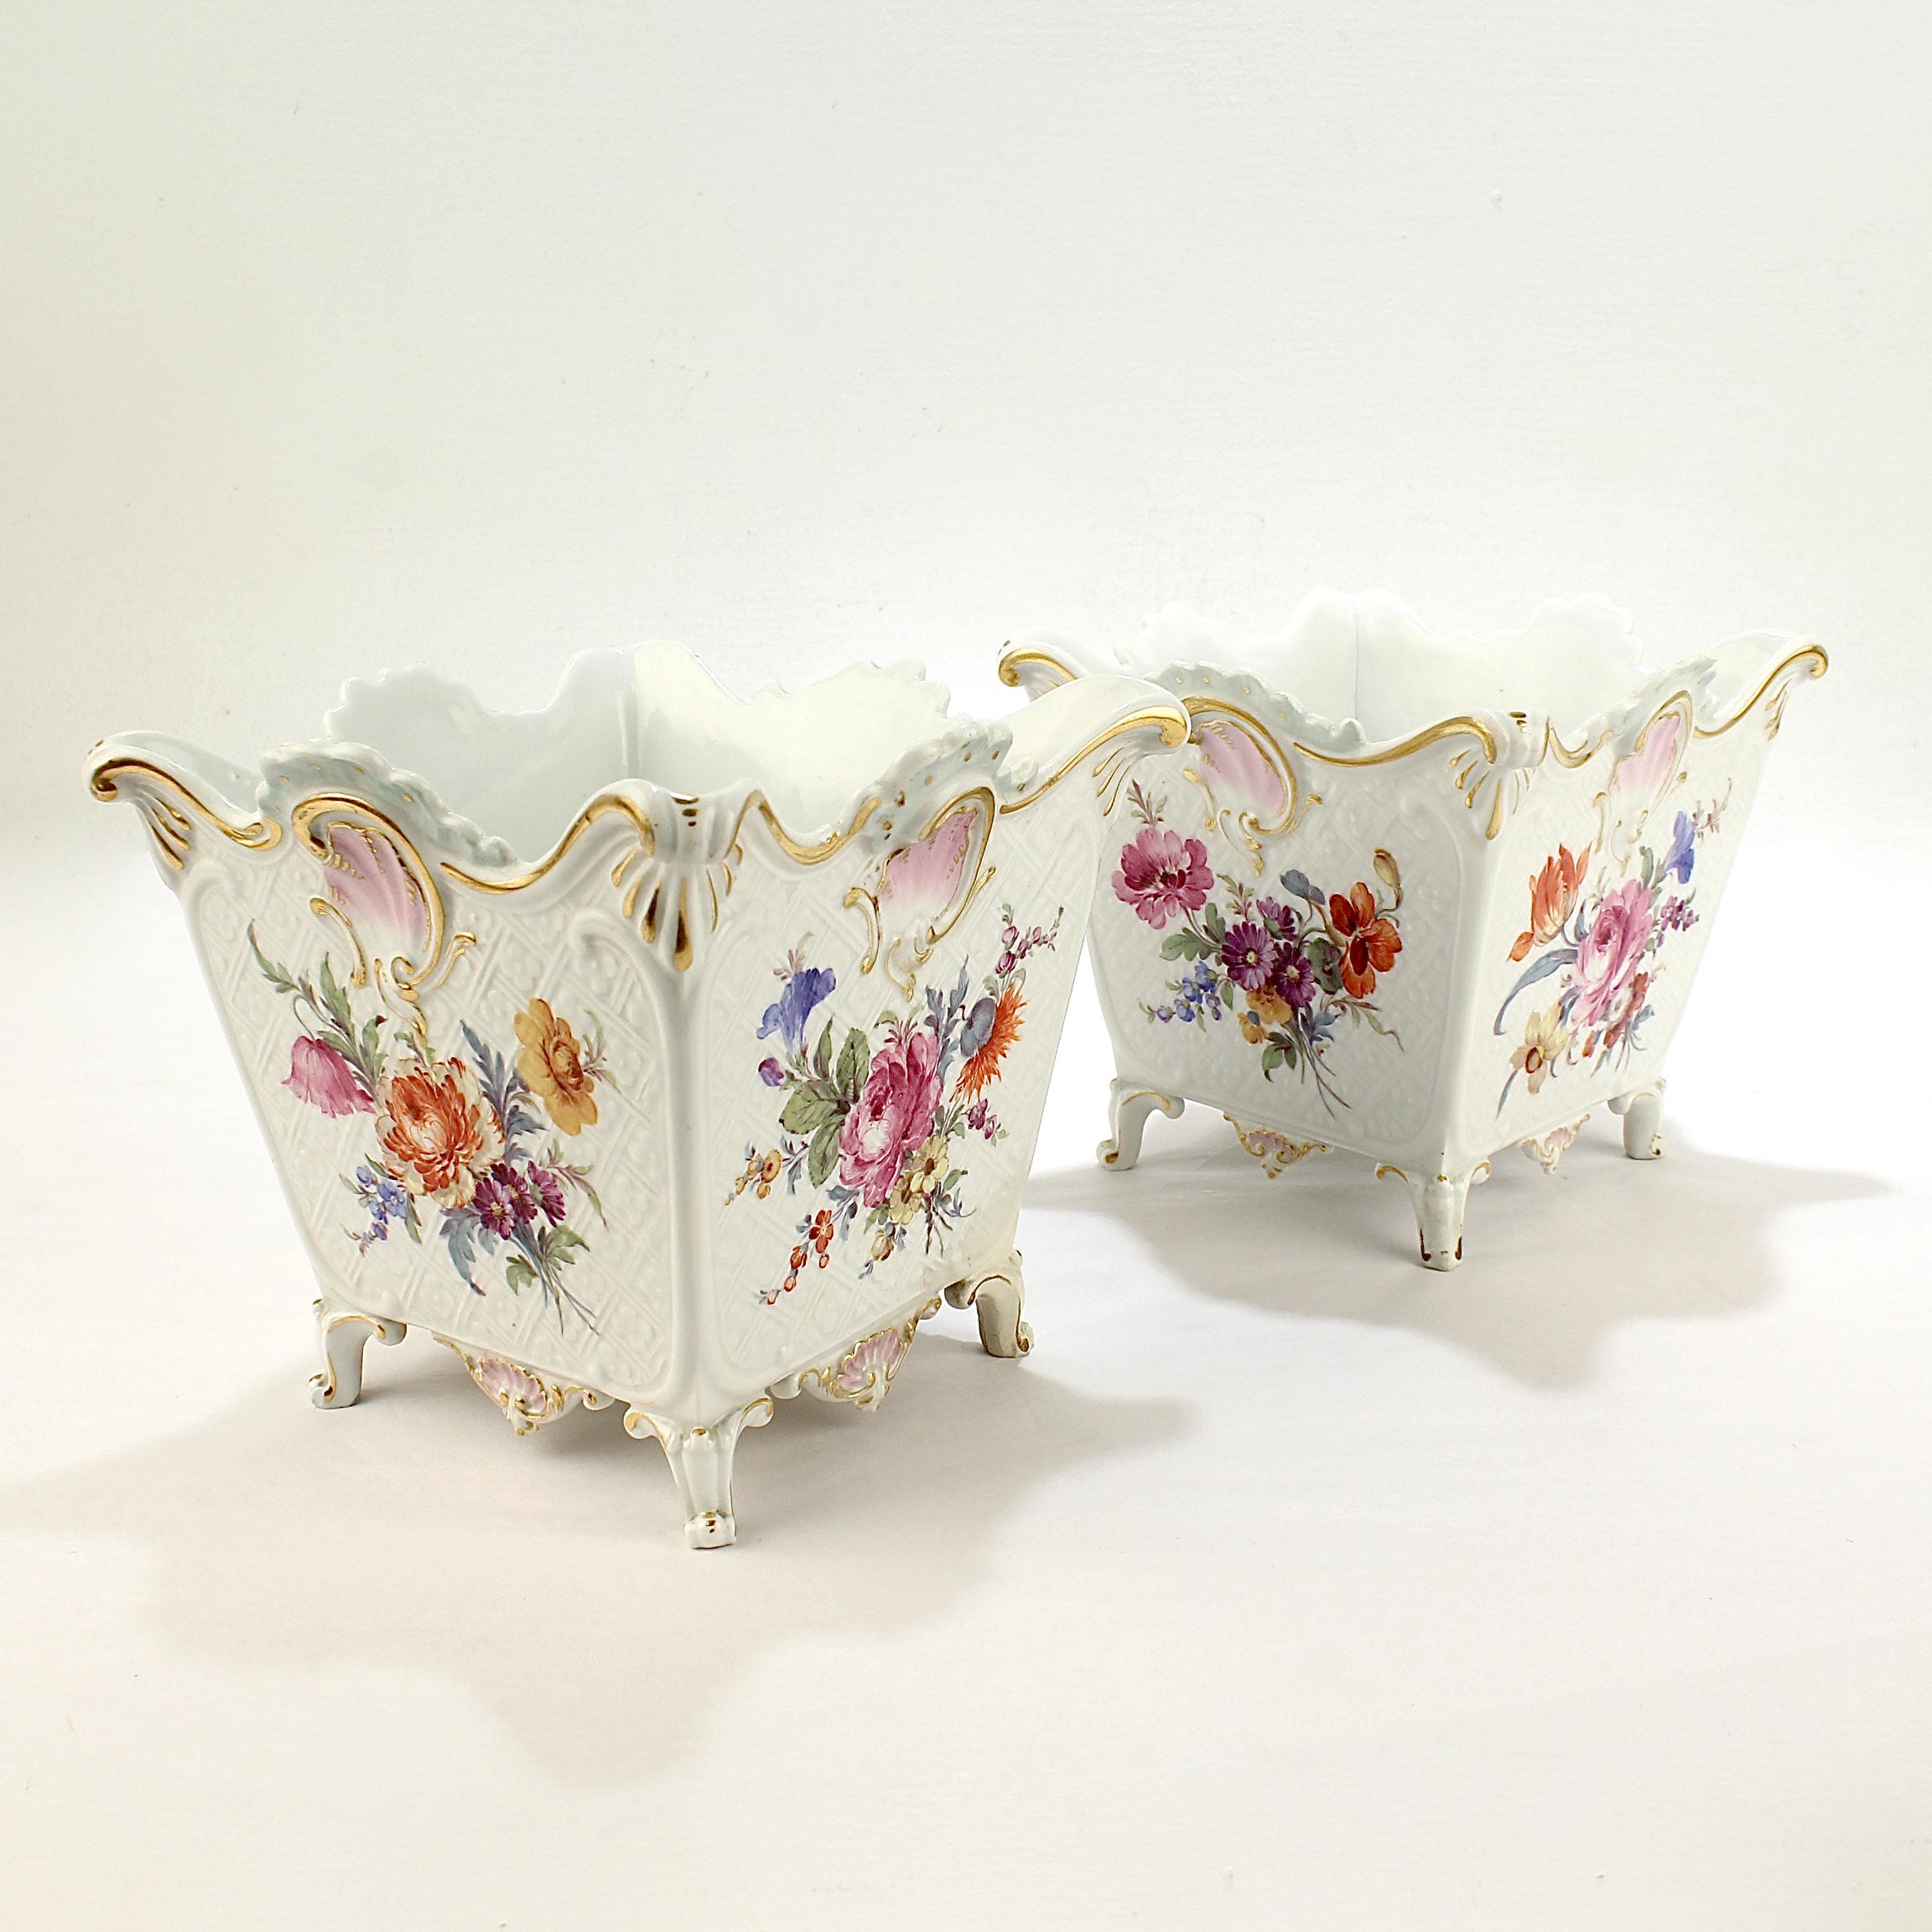 A pair of fine antique porcelain cachepots. 

By the Meissen Porcelain Manufactory. 

The body relief is molded in a basketwork and forget-me-not pattern and decorated with Deutsche Blumen floral bouquets and turquoise, pink, and blue